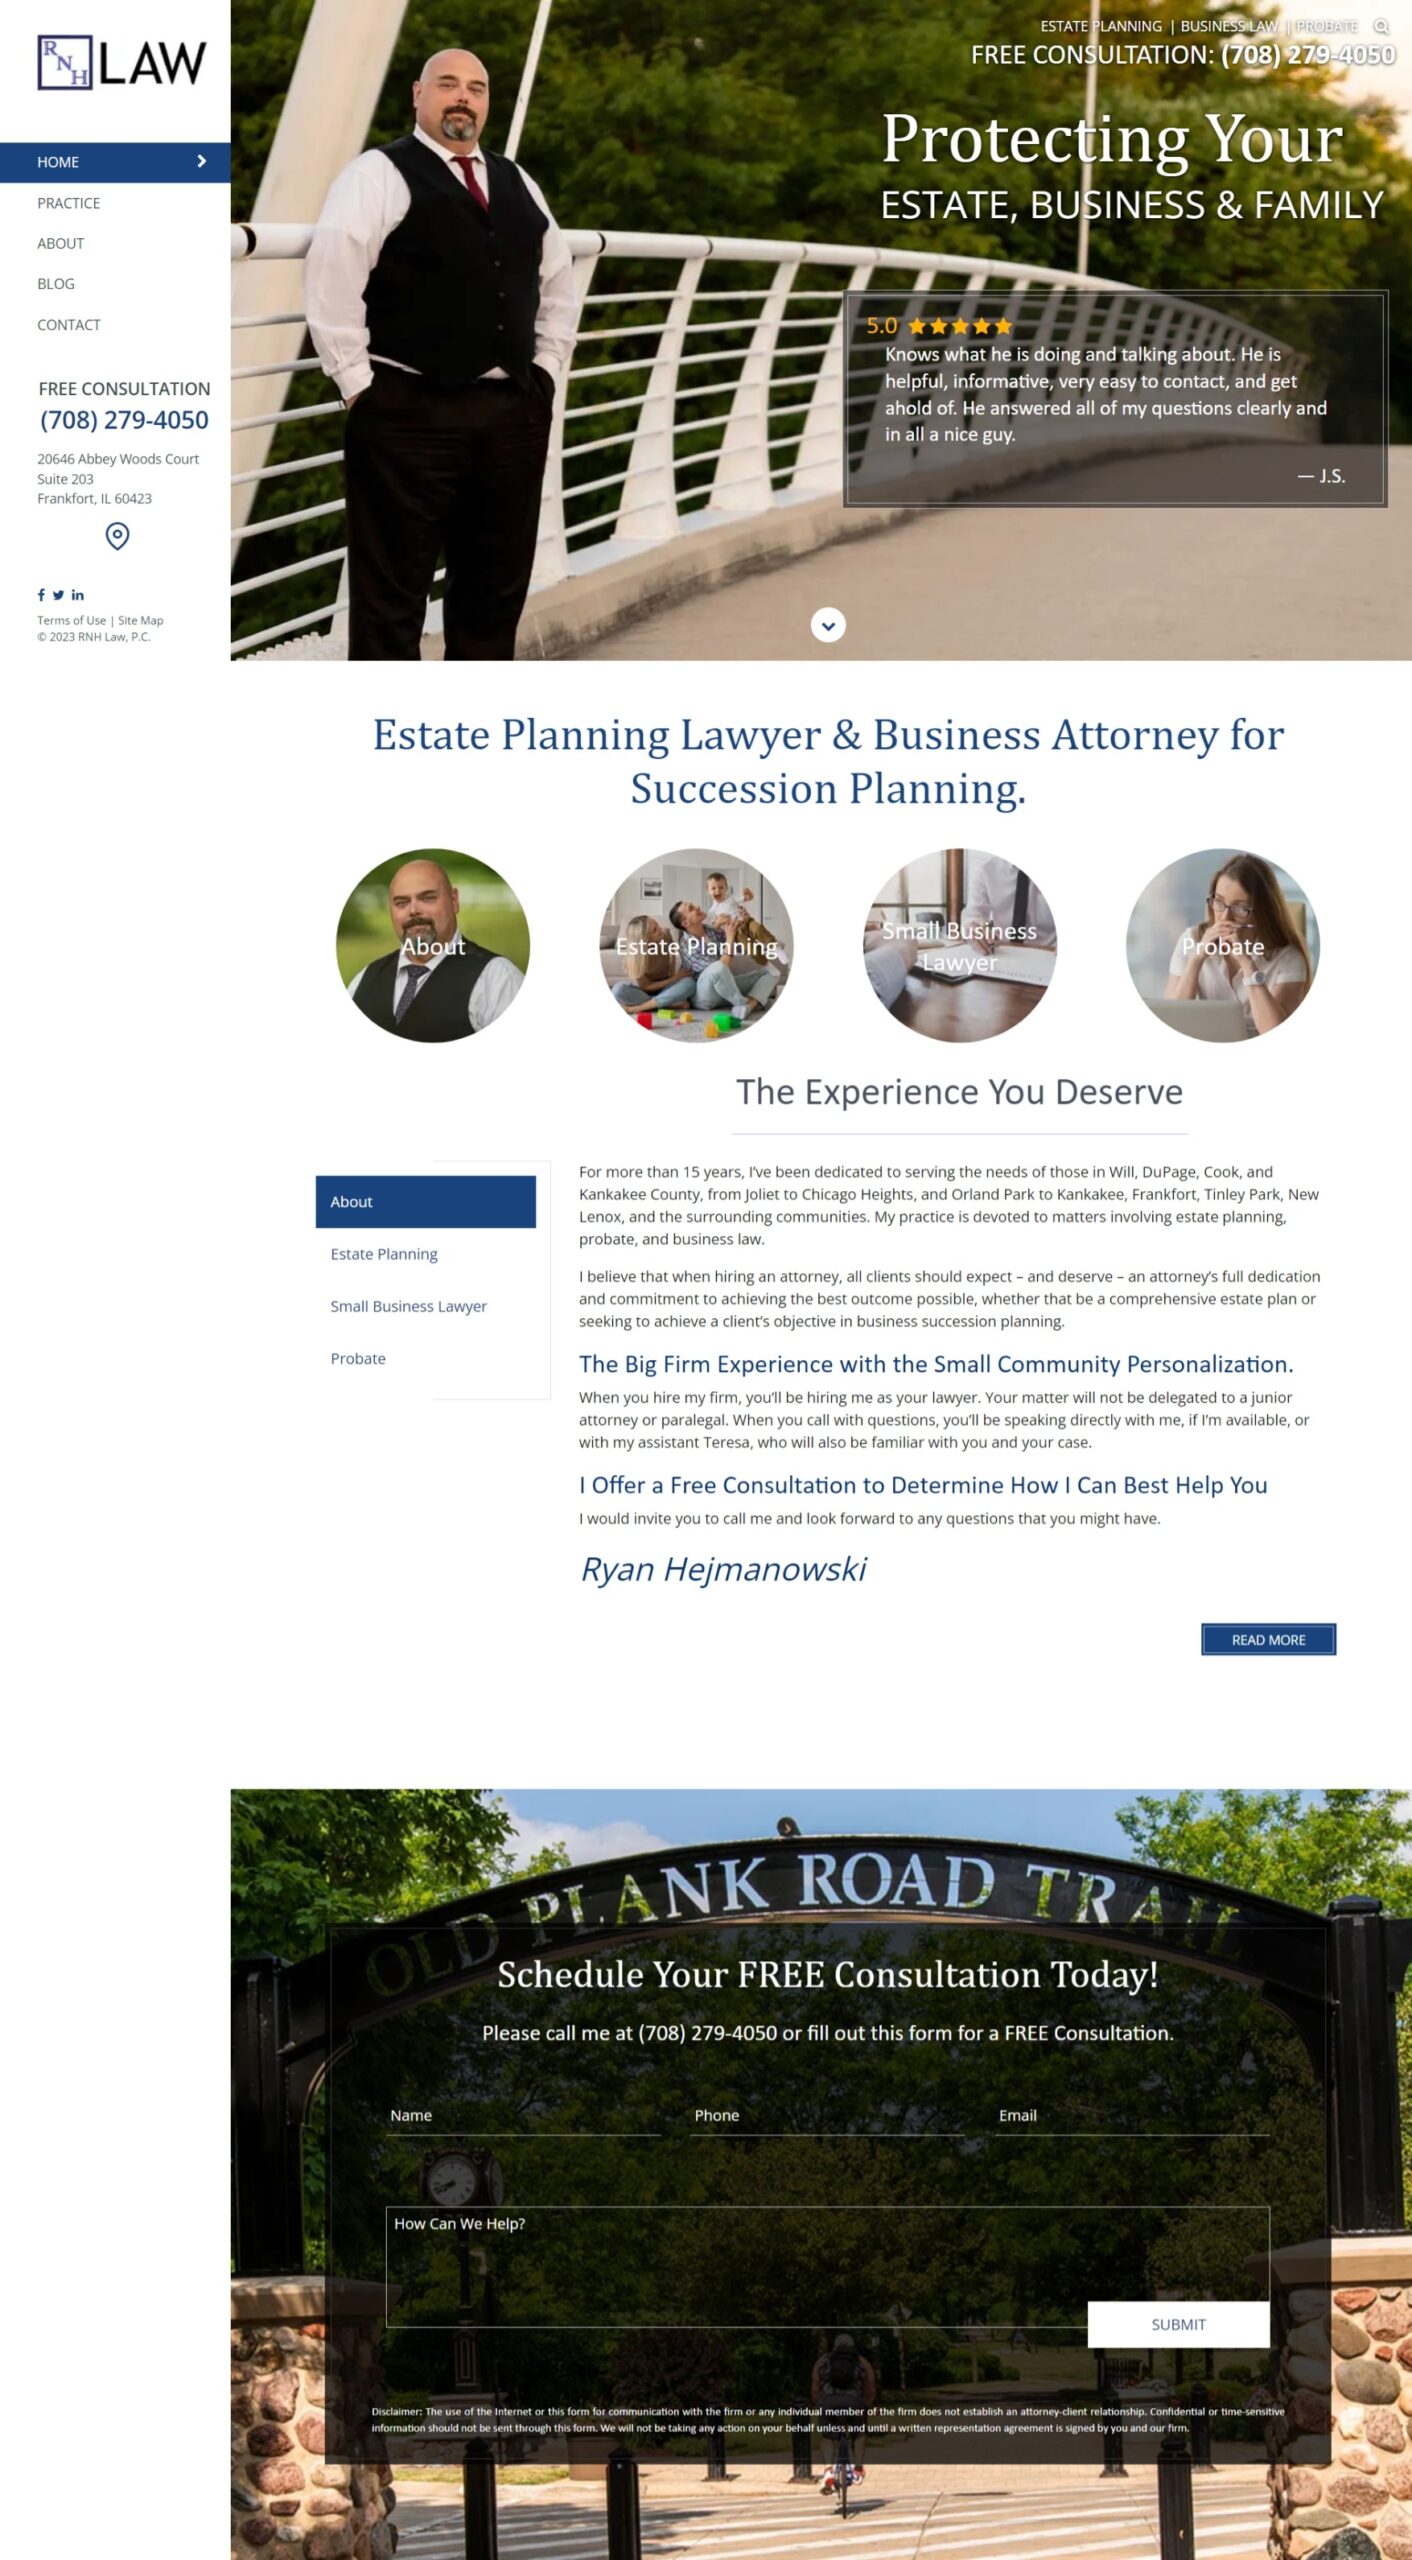 A photo of the full home page of RNH Law